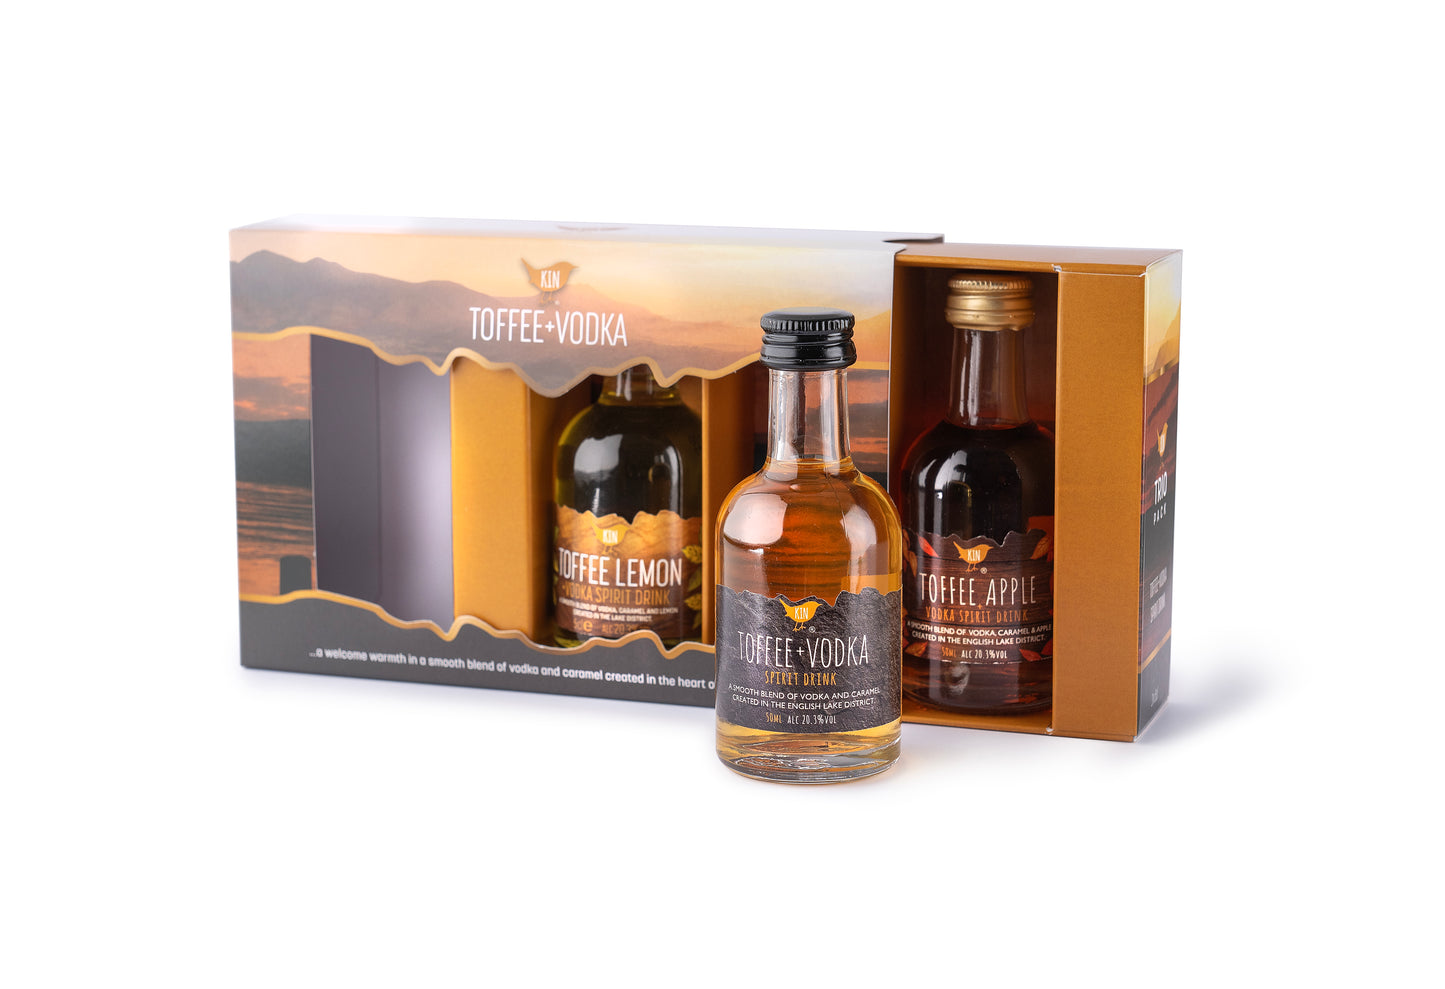 A 5cl bottle of original Kin Toffee Vodka stands in front of a Trio Gift pack in full colour printed box with a lake district view in background. Slide out tray holding two 5cl bottles of  Kin Toffee Apple Vodka and  Kin Toffee Lemon Vodka